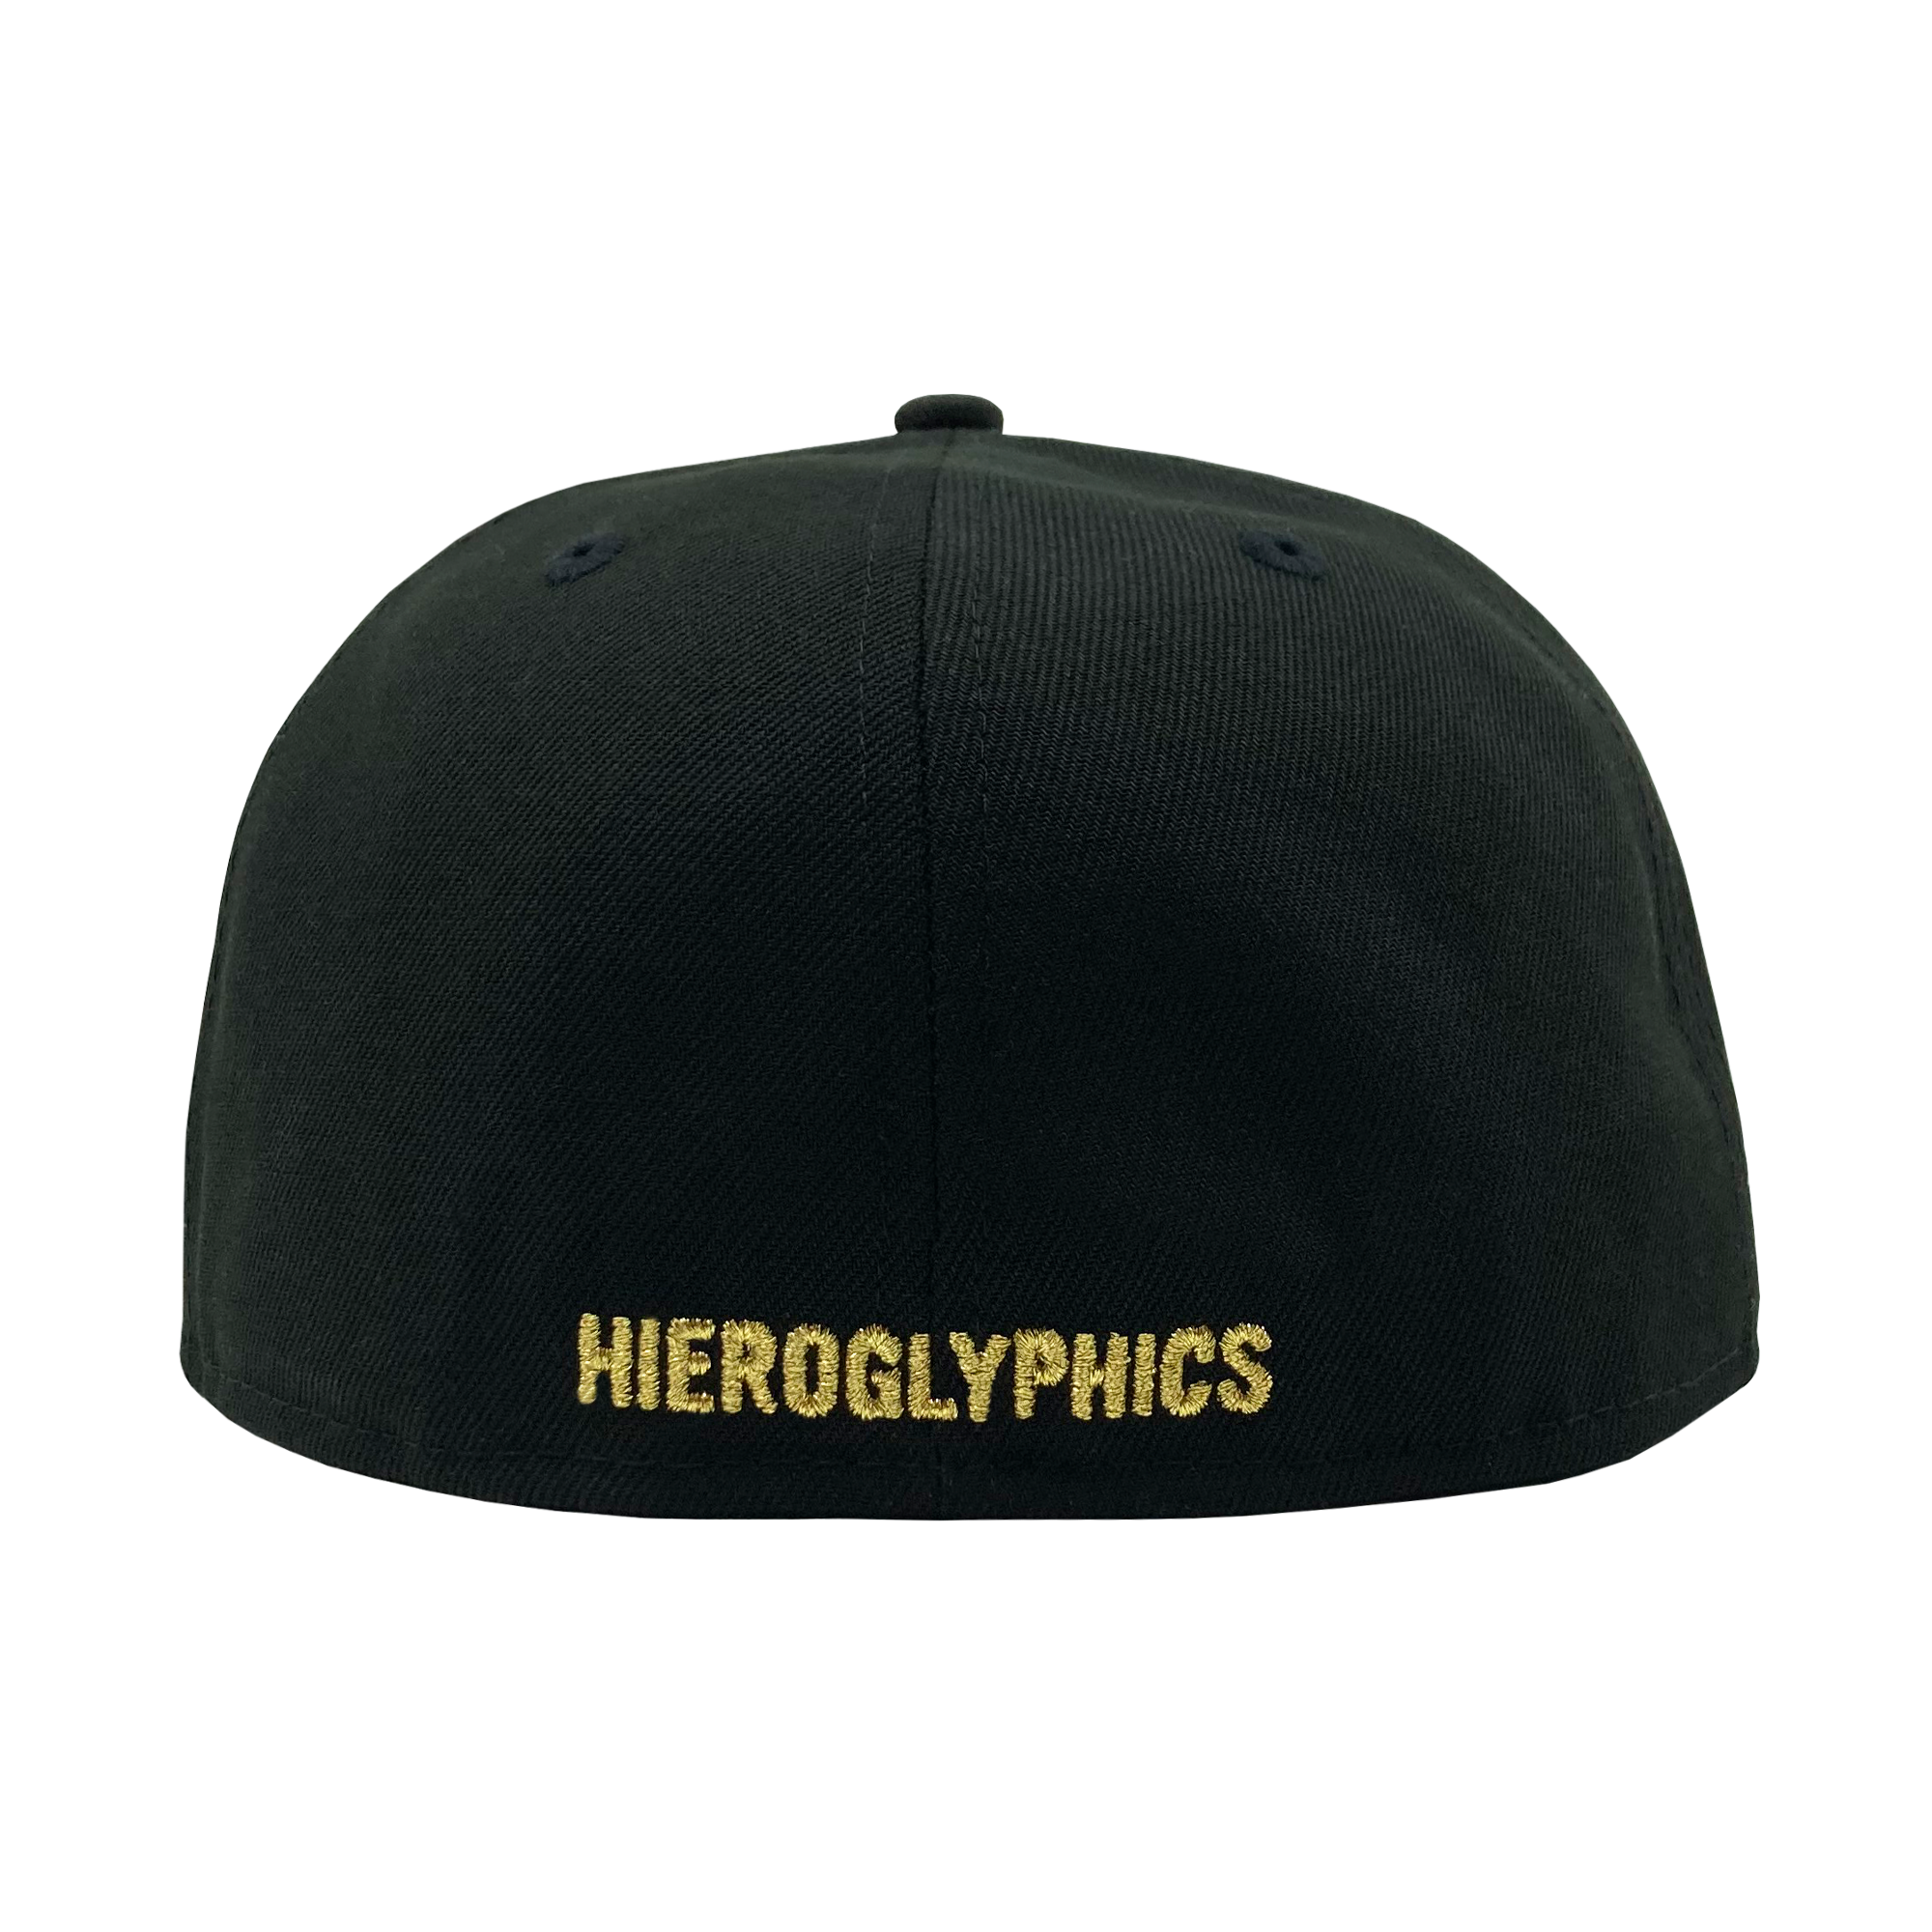 The backside of a black fitted New Era cap with gold embroidered Hieroglyphics wordmark.